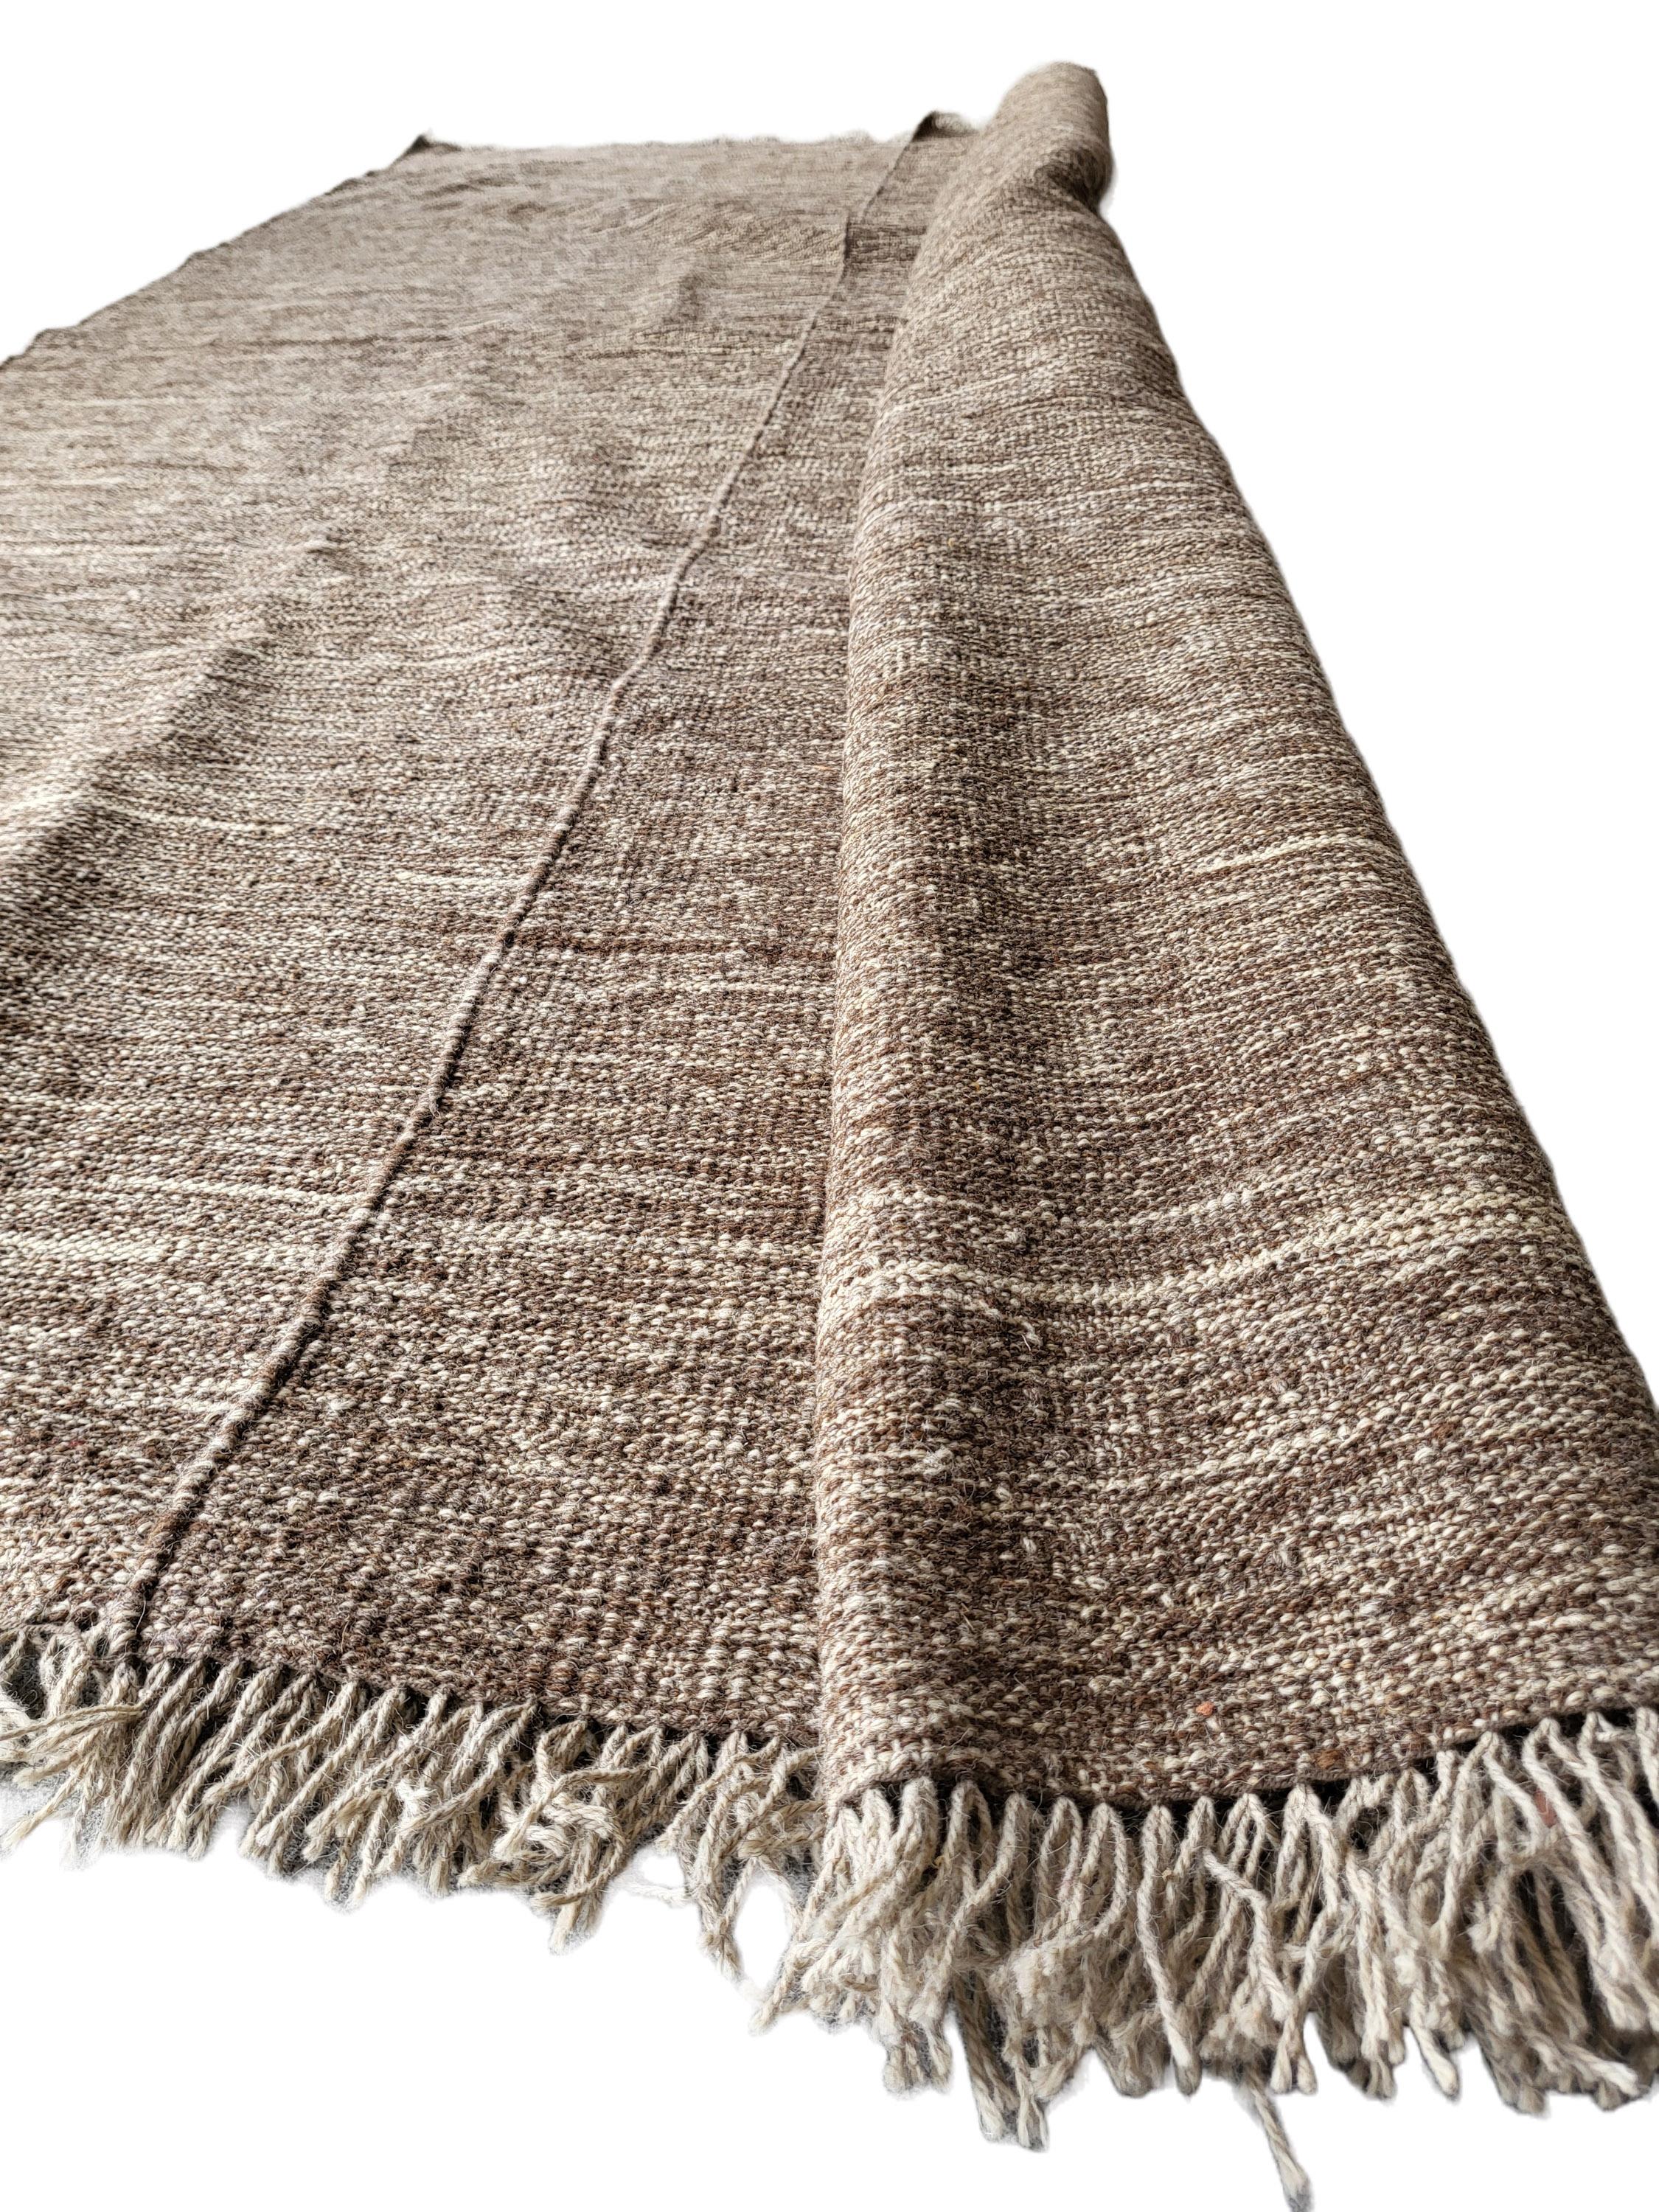 Incredible contemporary designer Gabbeh Kilim. This beautiful, neutral toned piece was commissioned for a special series of Kilims that focus on the beauty of natural wool tones. This kilim is dye free and 100% natural wool. The undyed wool was